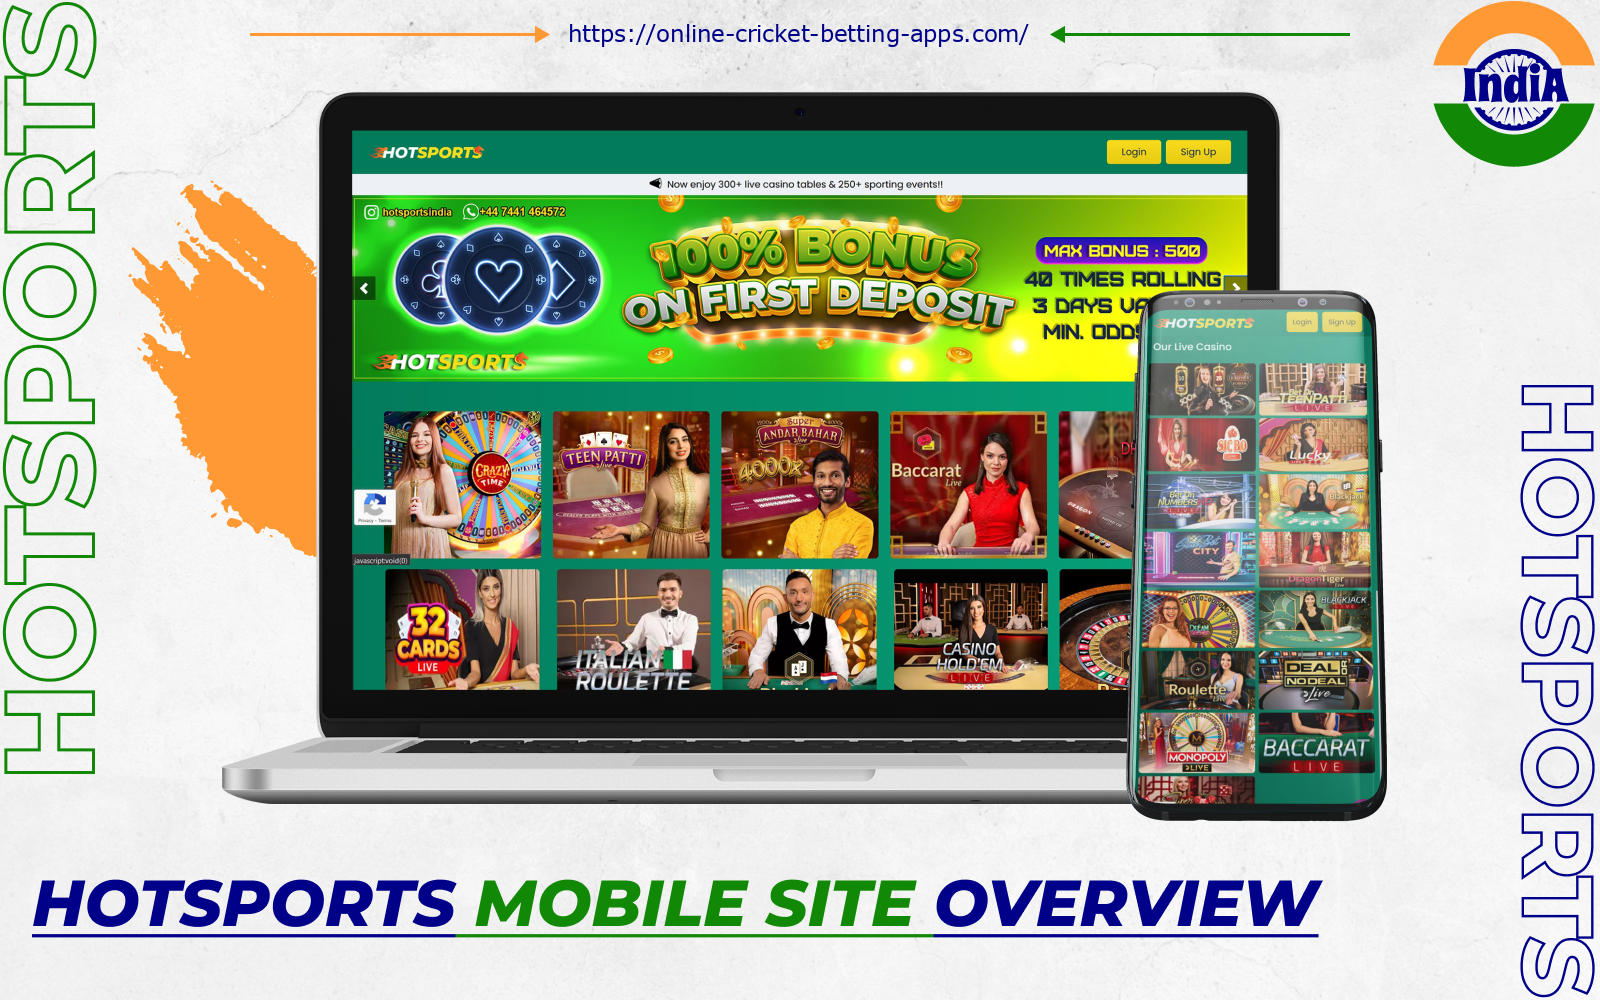 The Hotsports mobile site has a mobile-friendly interface and gathers all the features of a bookmaker - registration and account management, transactions, betting and casino games